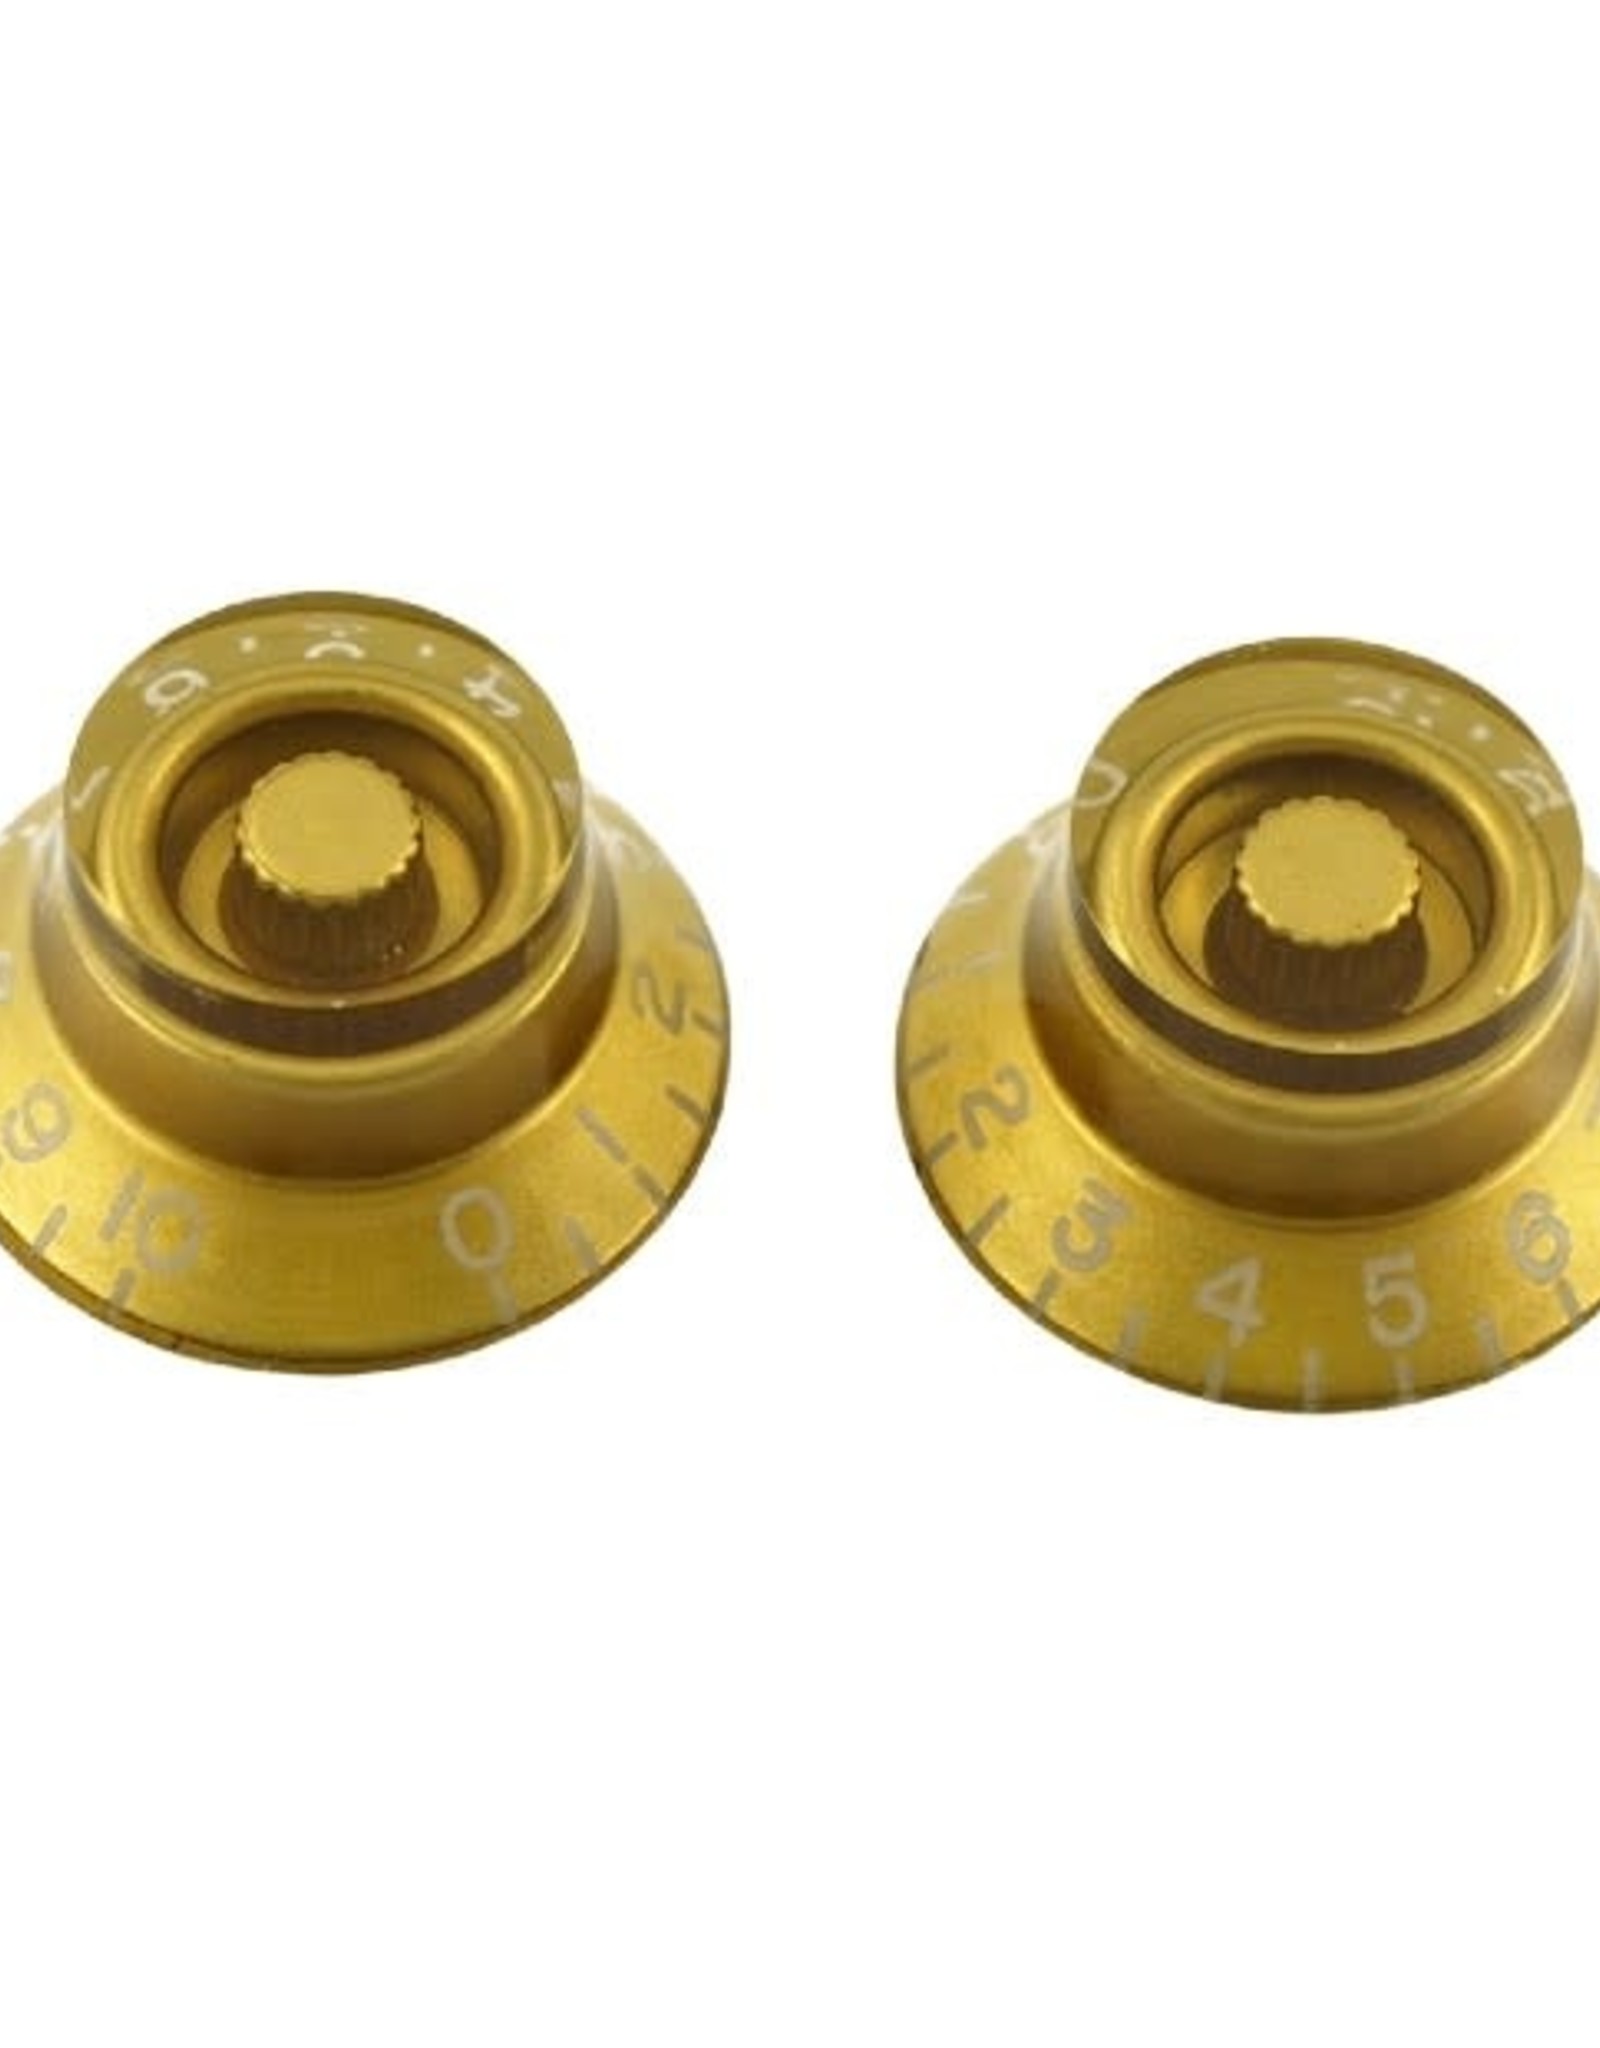 WD Music Products WD Bell Knob Set Of 2 Metric Gold